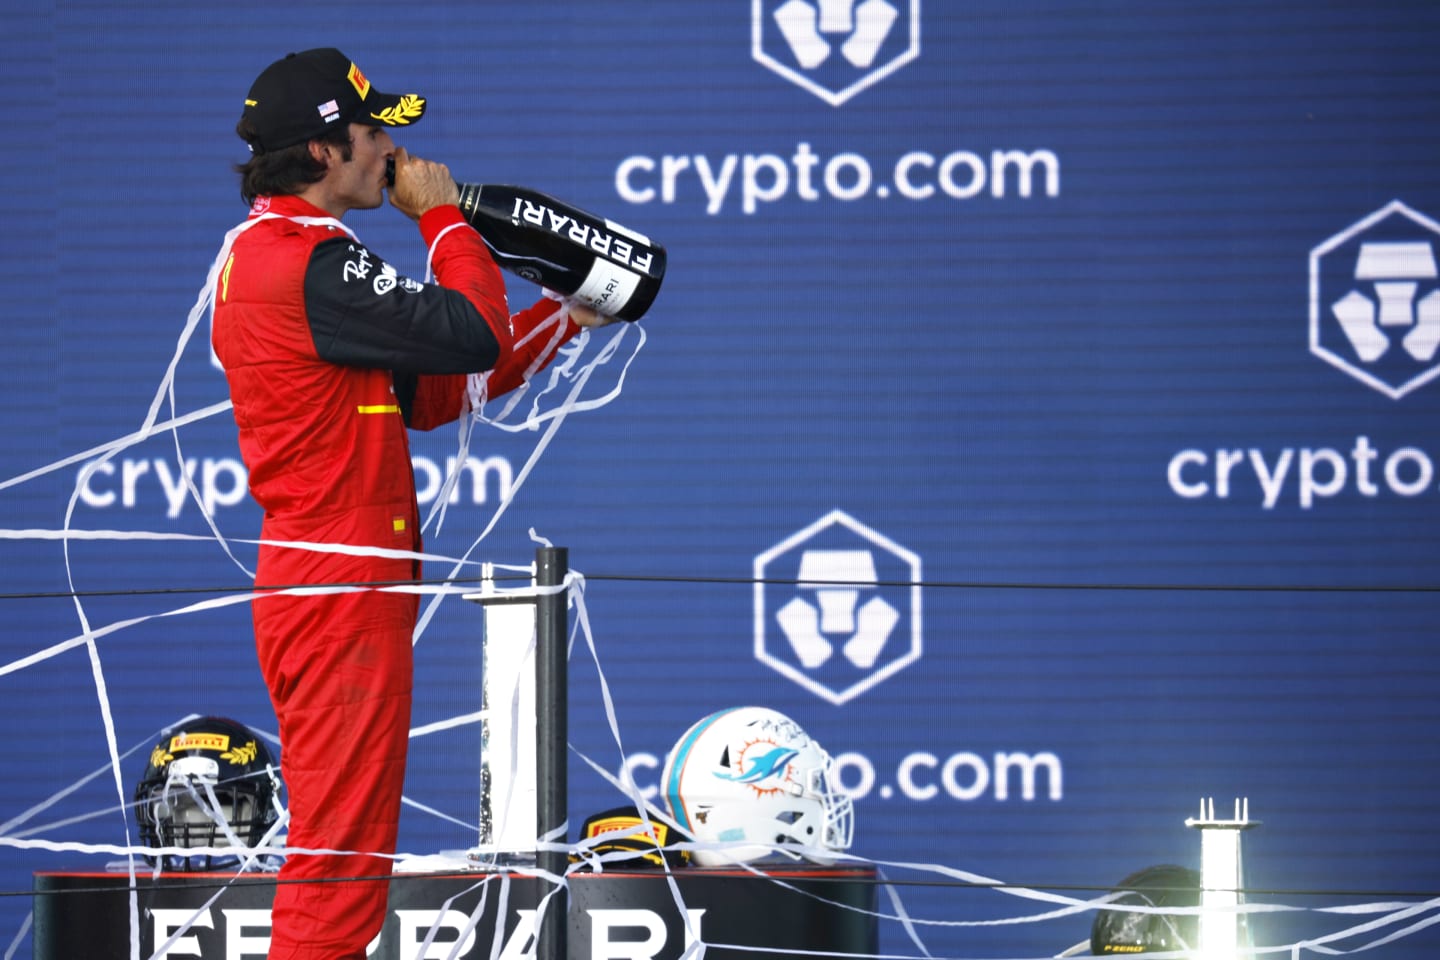 MIAMI, FLORIDA - MAY 08: Third placed Carlos Sainz of Spain and Ferrari celebrates on the podium during the F1 Grand Prix of Miami at the Miami International Autodrome on May 08, 2022 in Miami, Florida. (Photo by Chris Graythen/Getty Images)